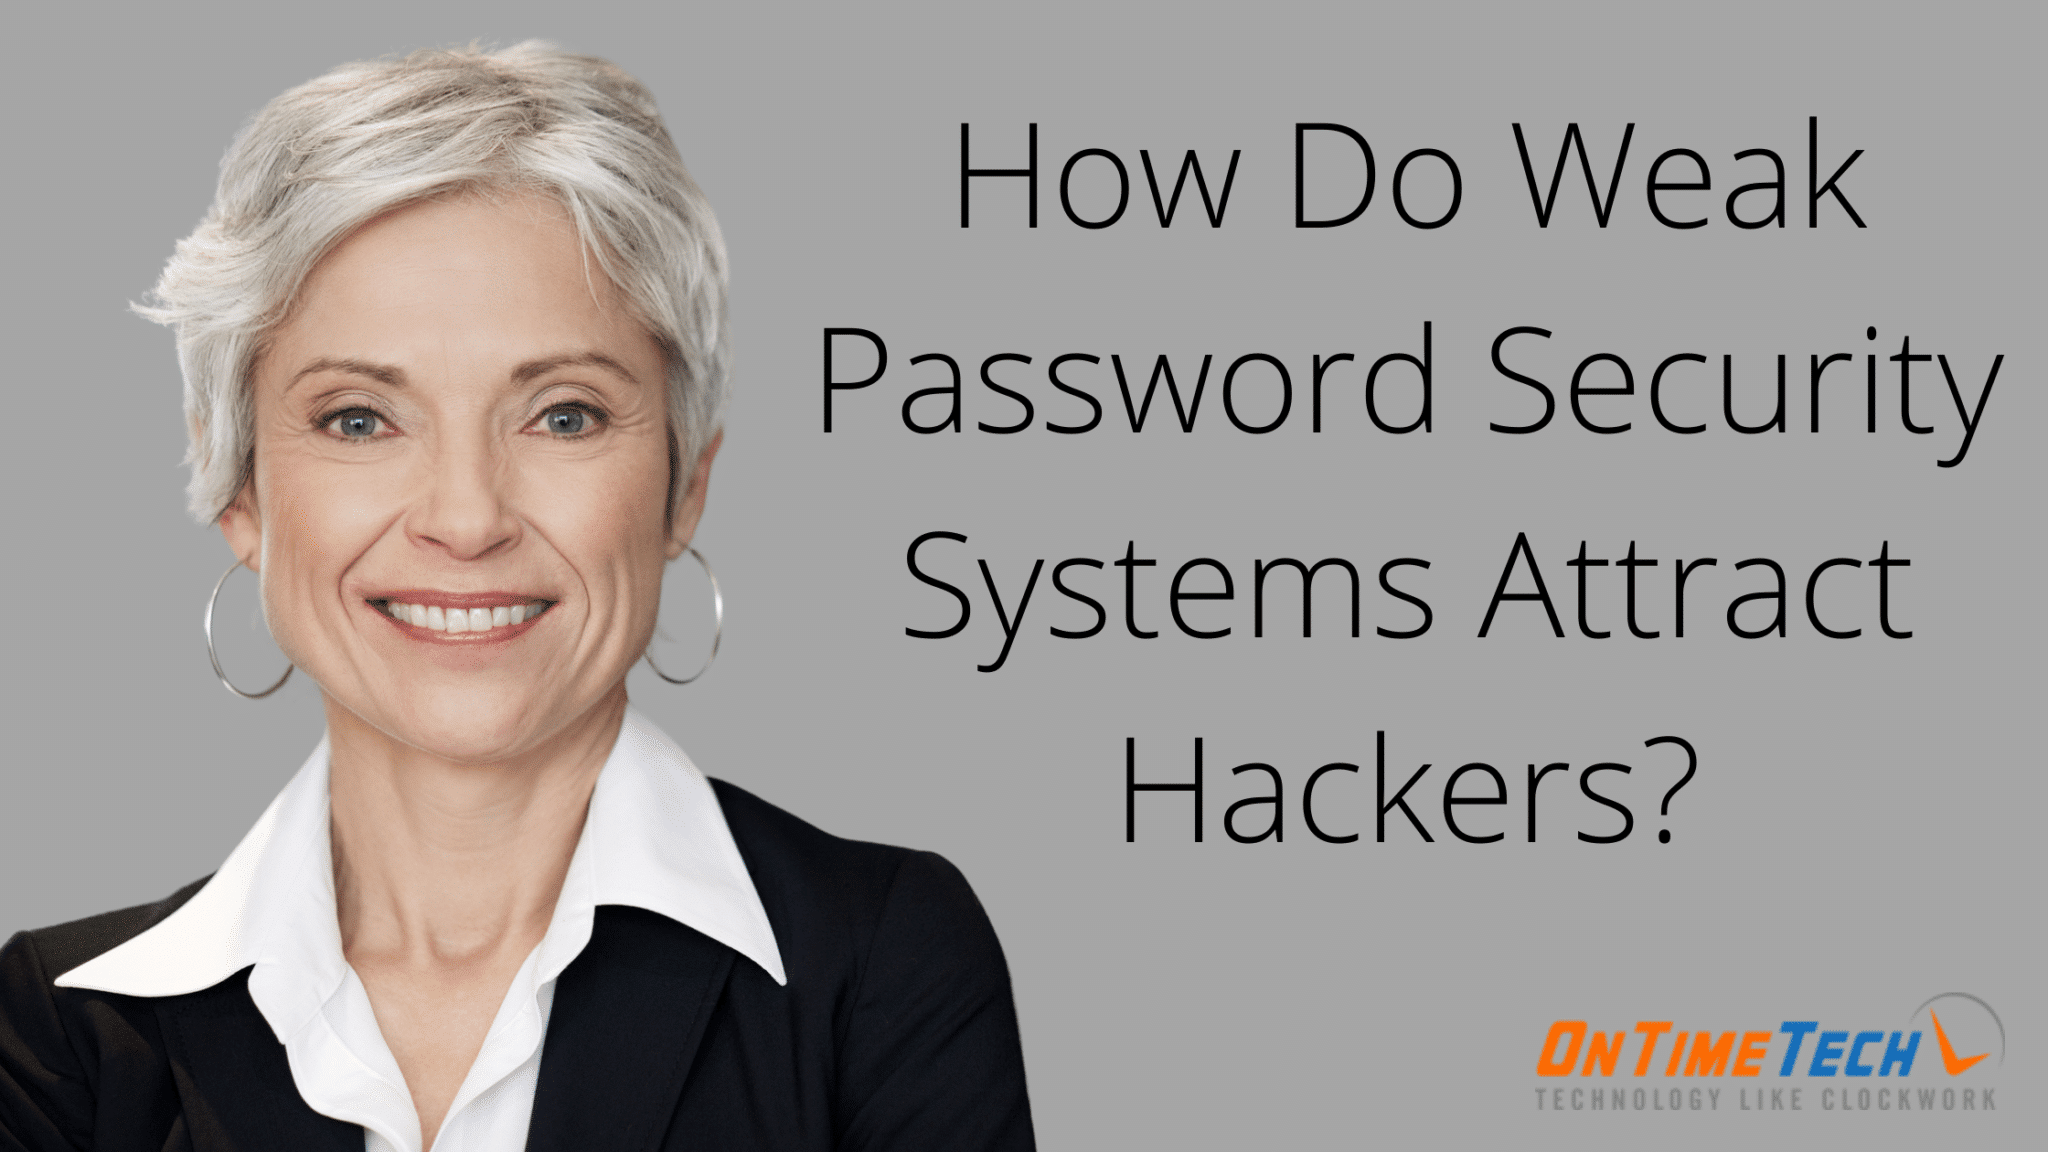 How Do Weak Password Security Systems Attract Hackers?